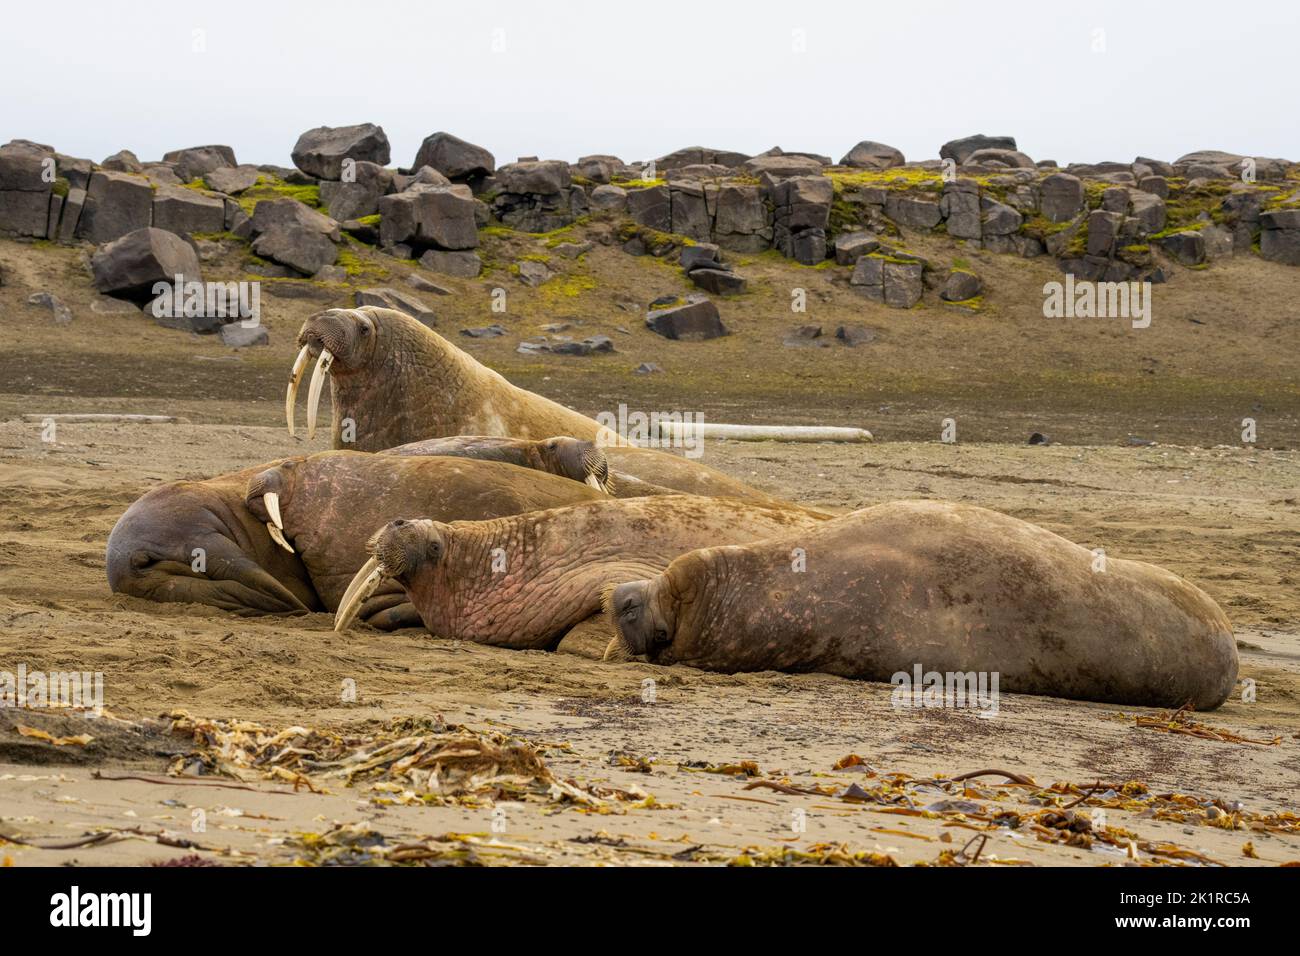 Atlantic walrus (Odobenus rosmarus). This large, gregarious relative of the seal has tusks that can reach a metre in length. Both the male (bulls) and Stock Photo